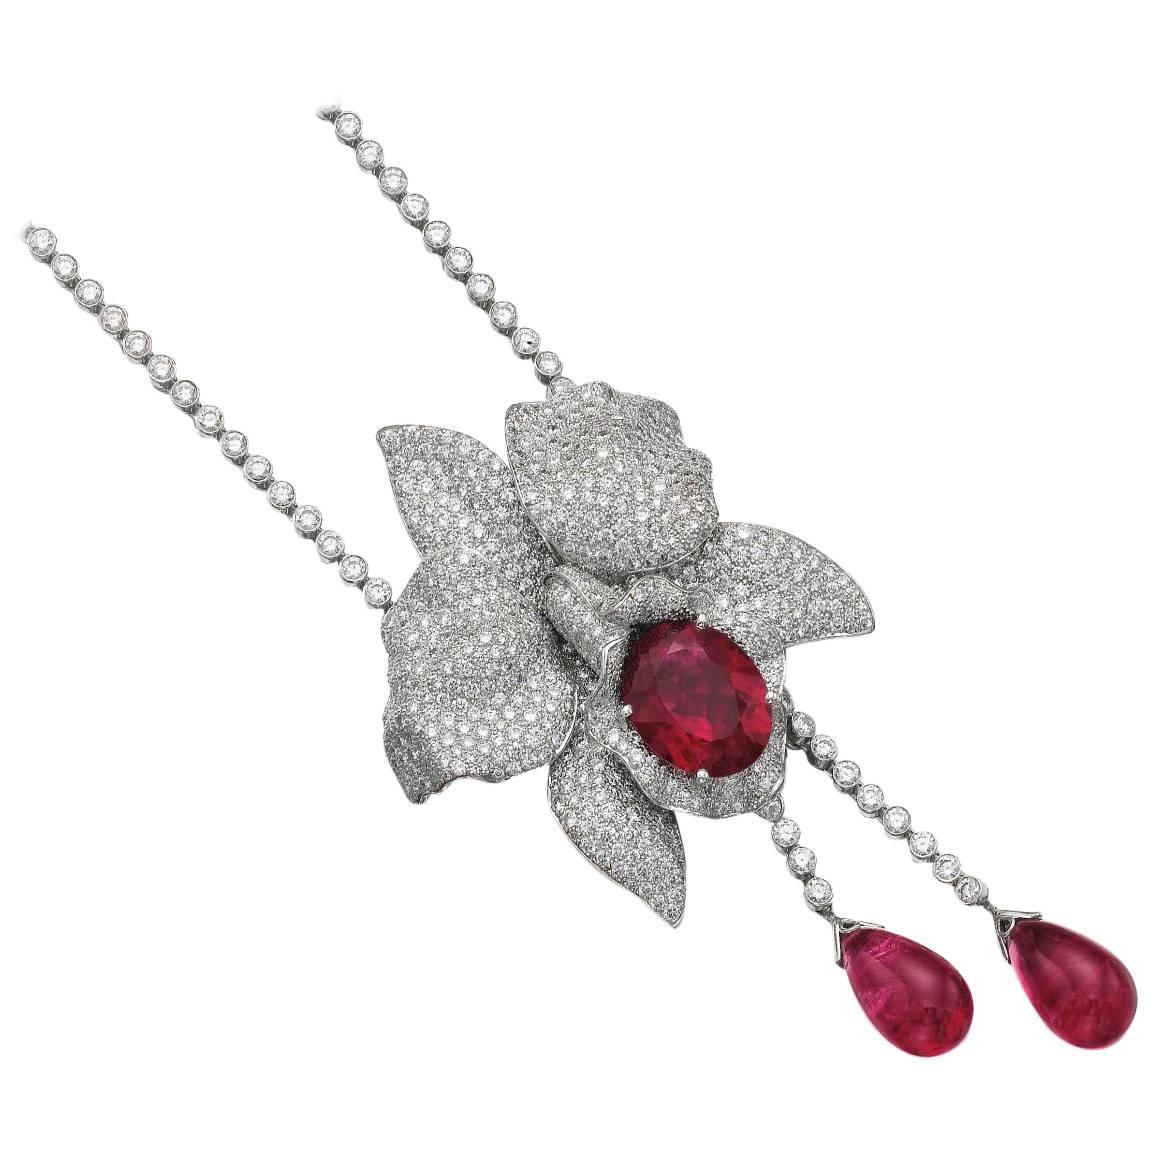 Cartier "Bahamas" Diamond Rubellite Necklace Brooch Collection For Sale